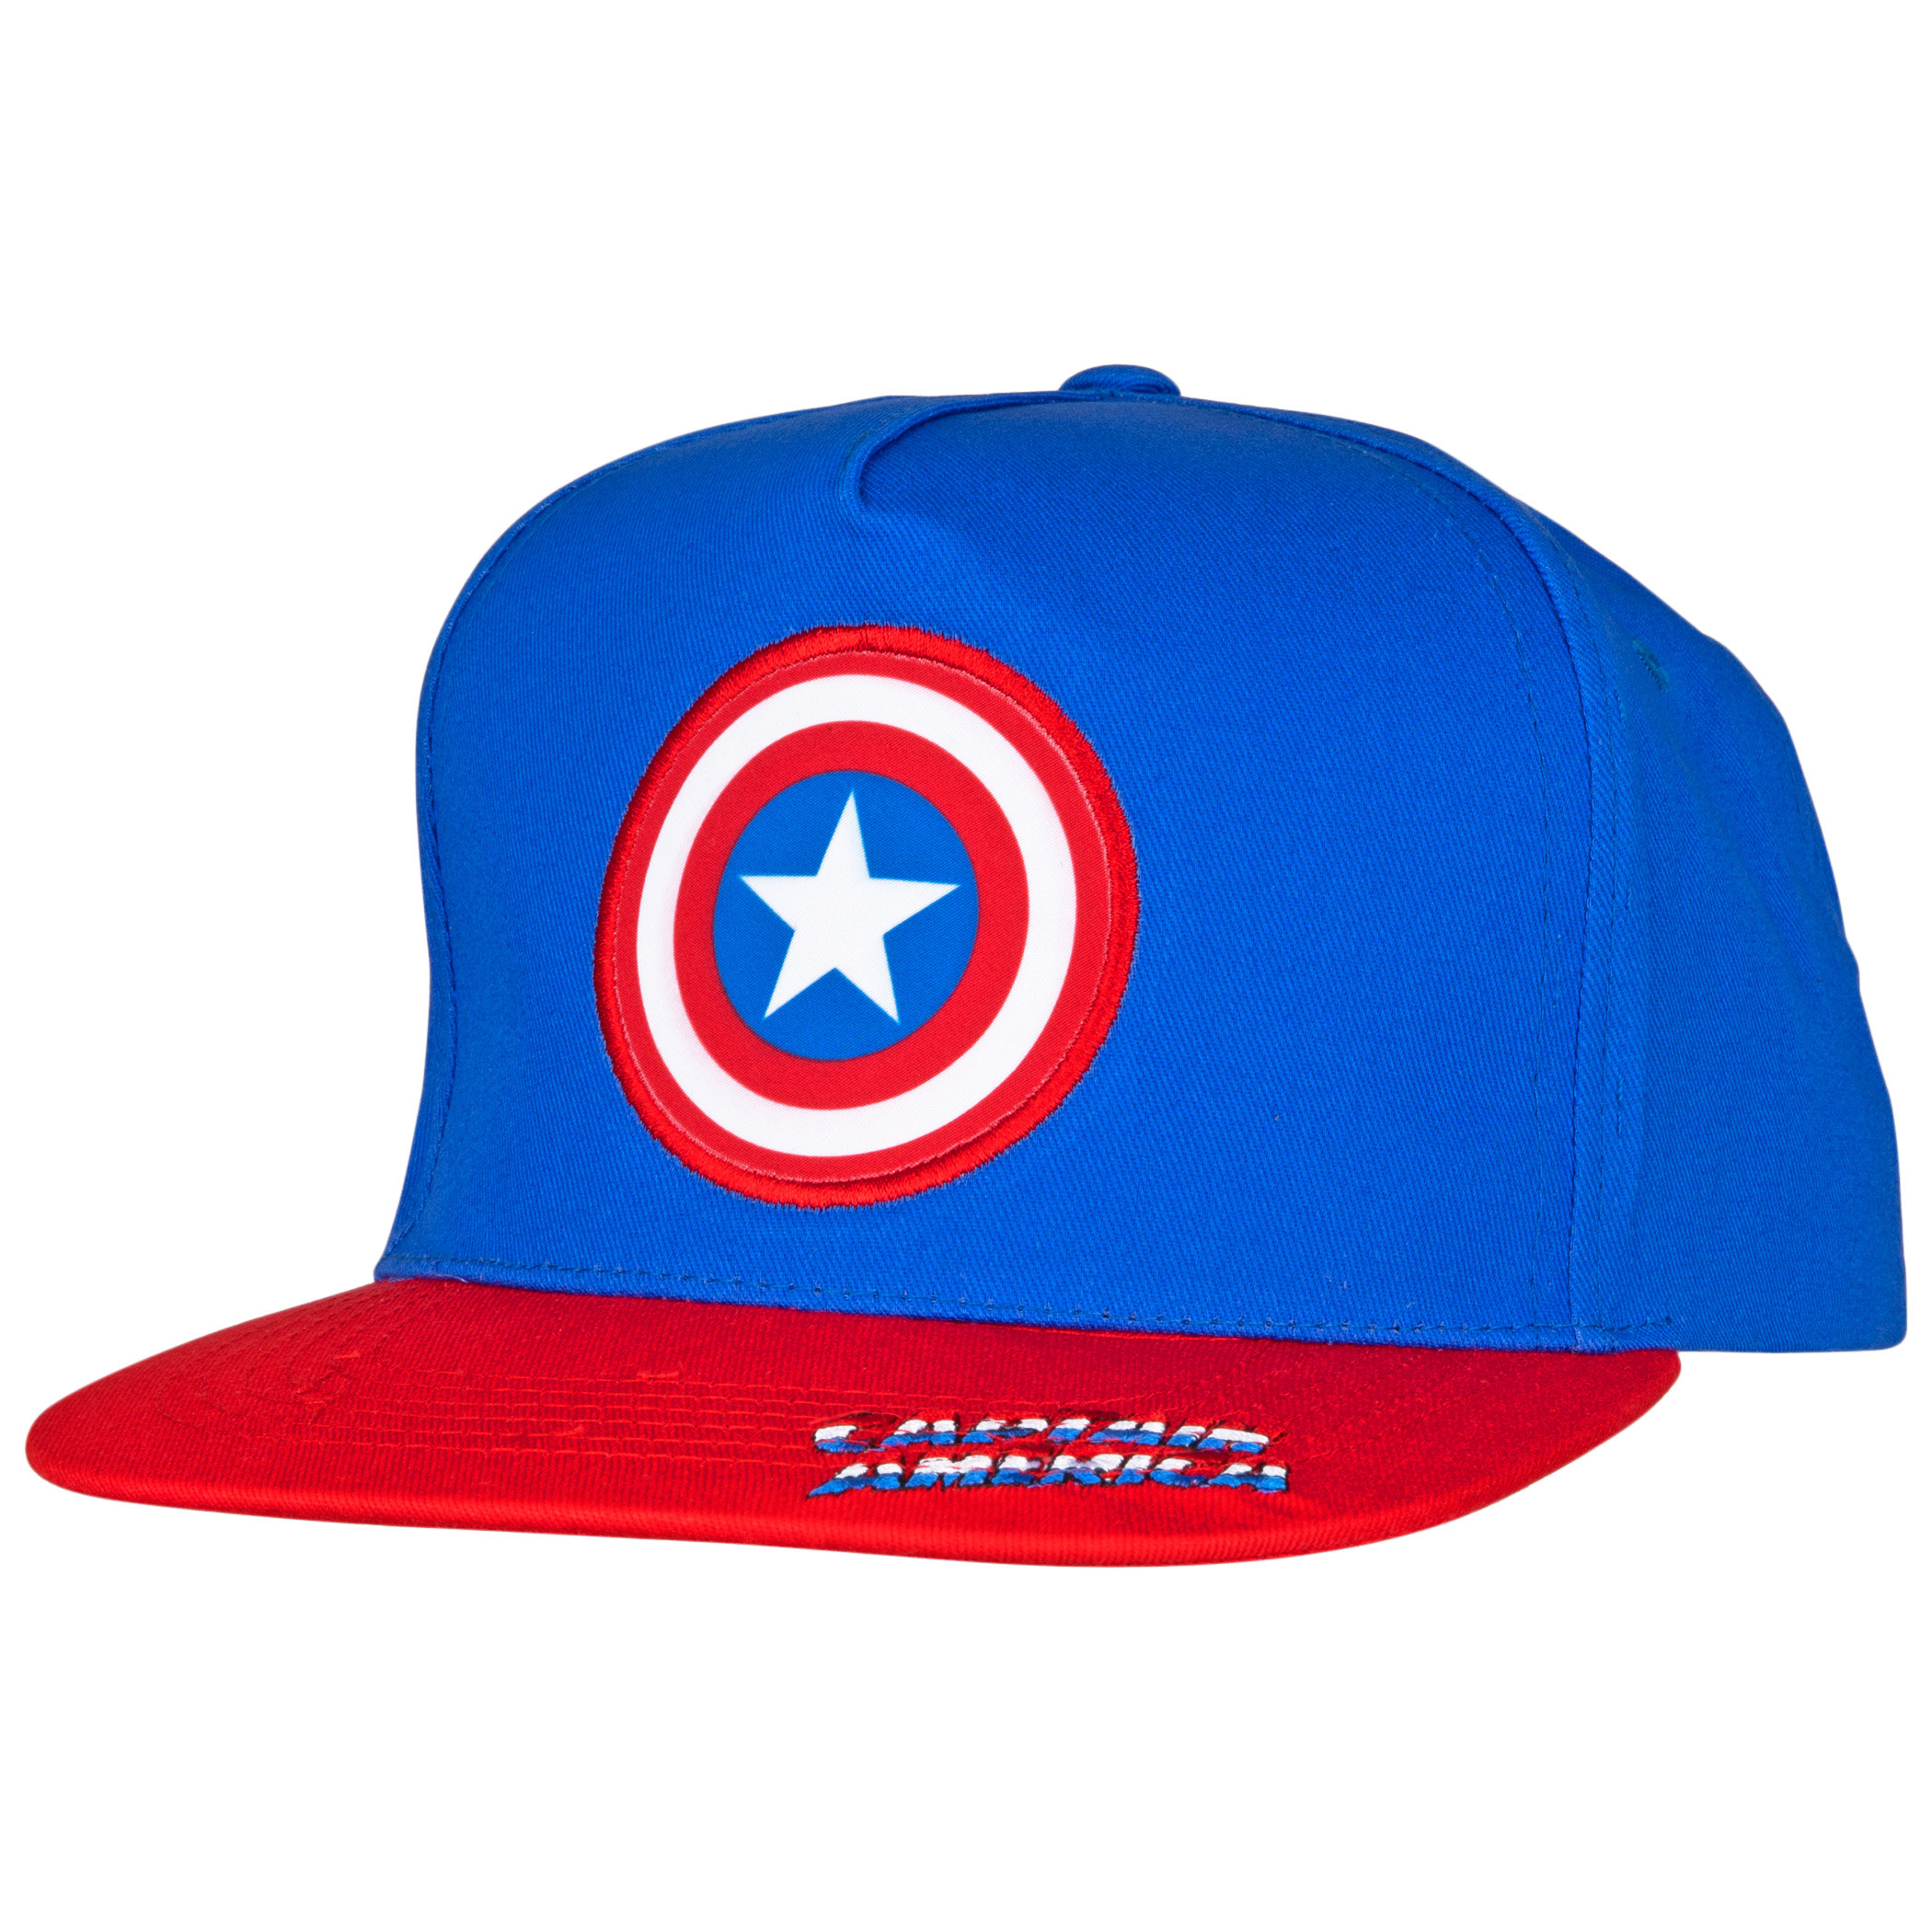 Captain America Classic Shield Logo With Brim Text Adjustable Snapback Hat